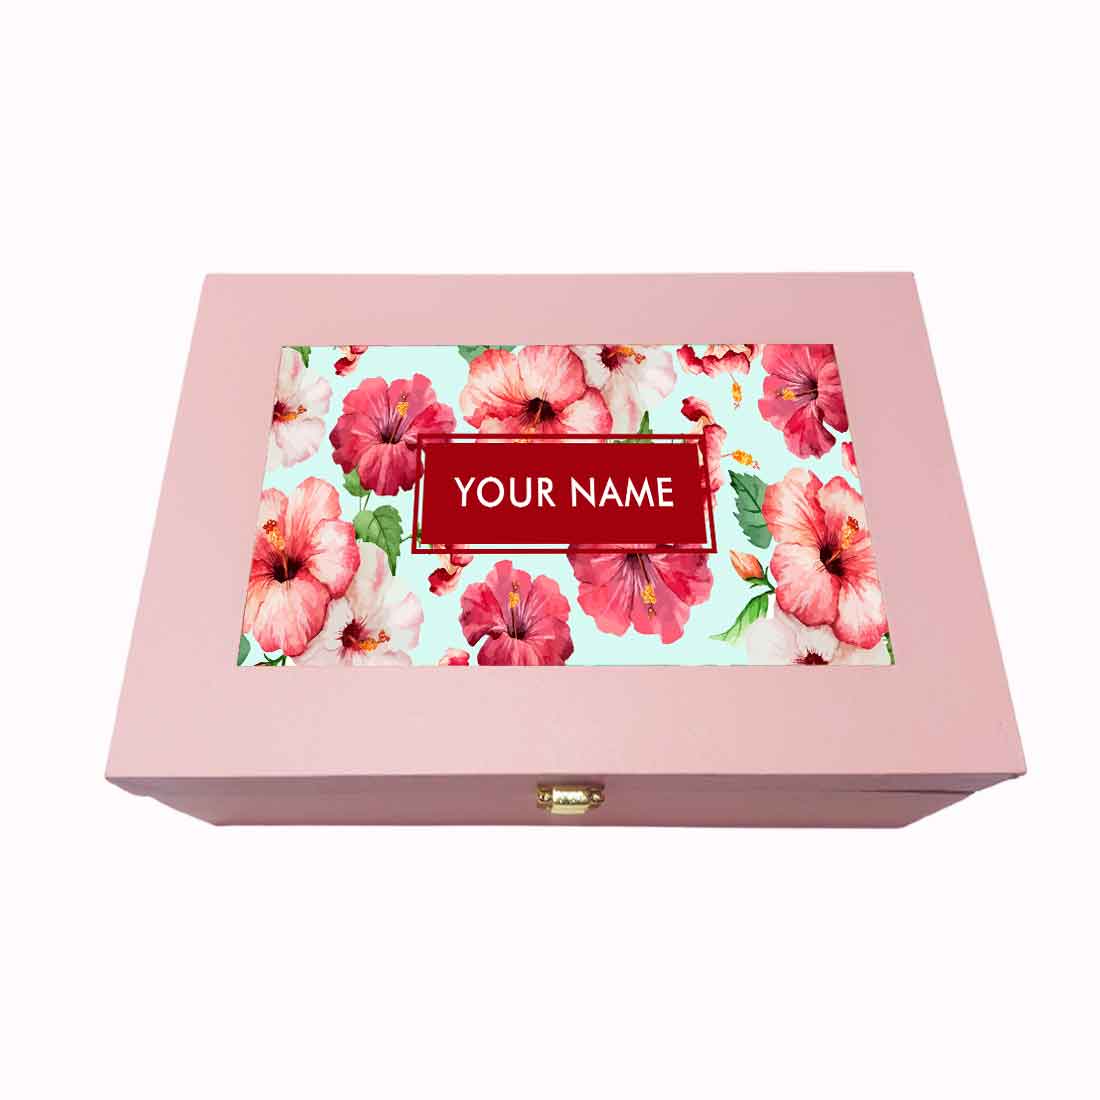 Personalized Gift Box for Her Add Your Name - Pink Hibiscus